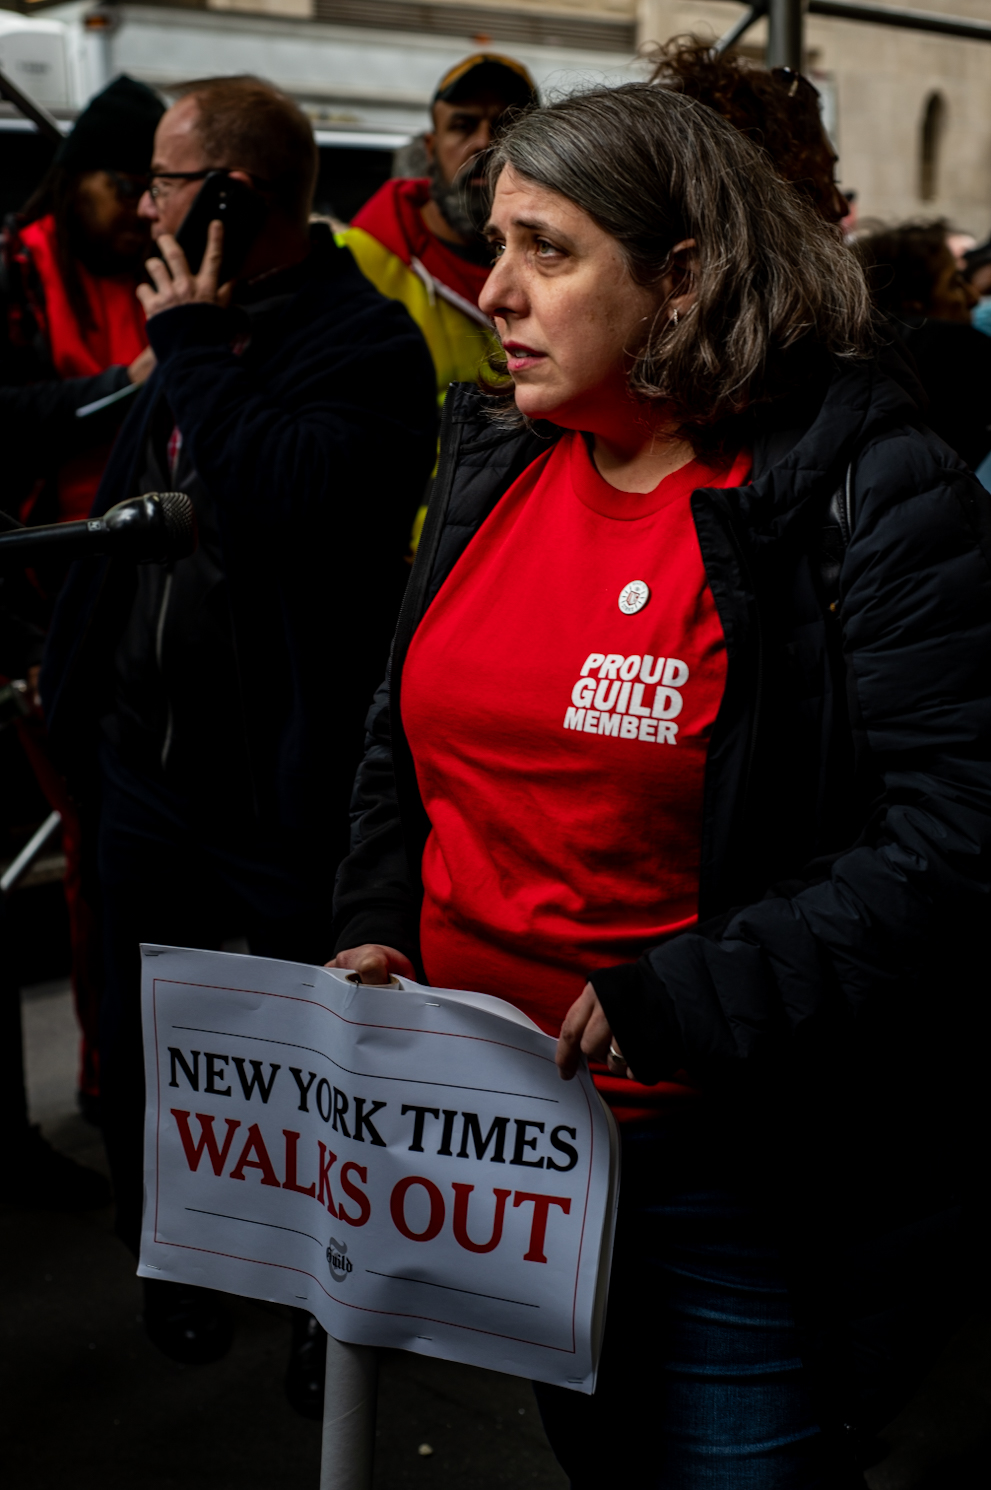 In+photos%3A+Journalists+of+The+New+York+Times+stage+a+walkout